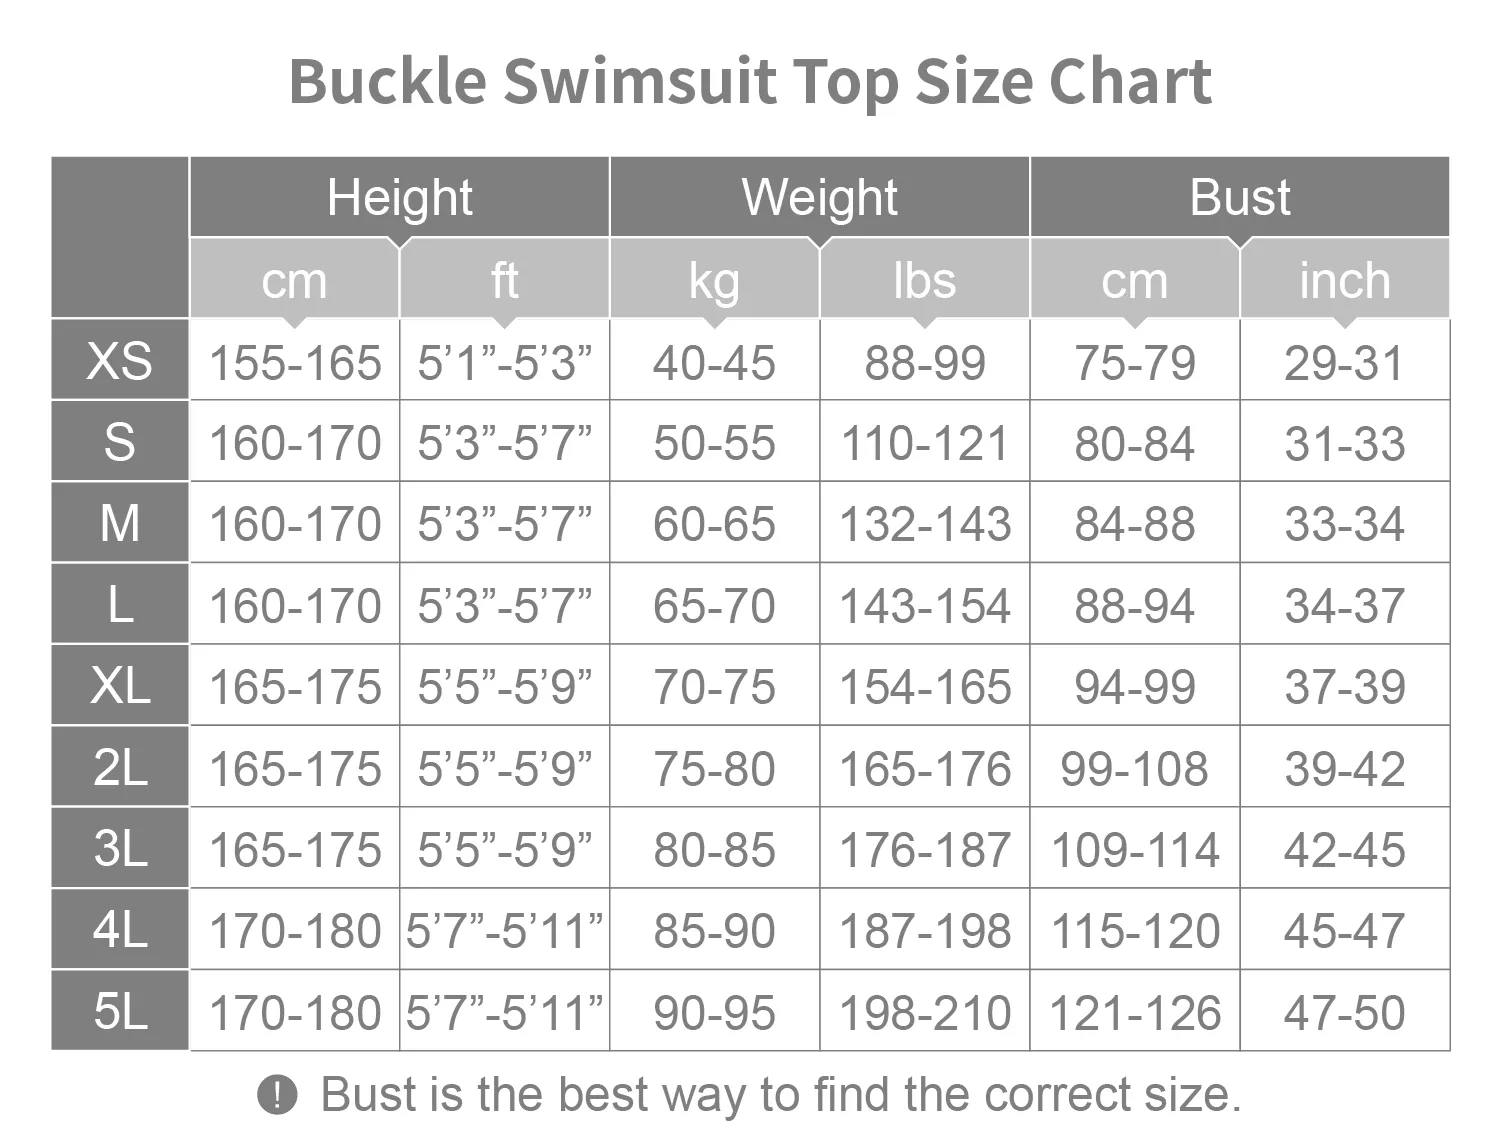 The Buckle Size Chart